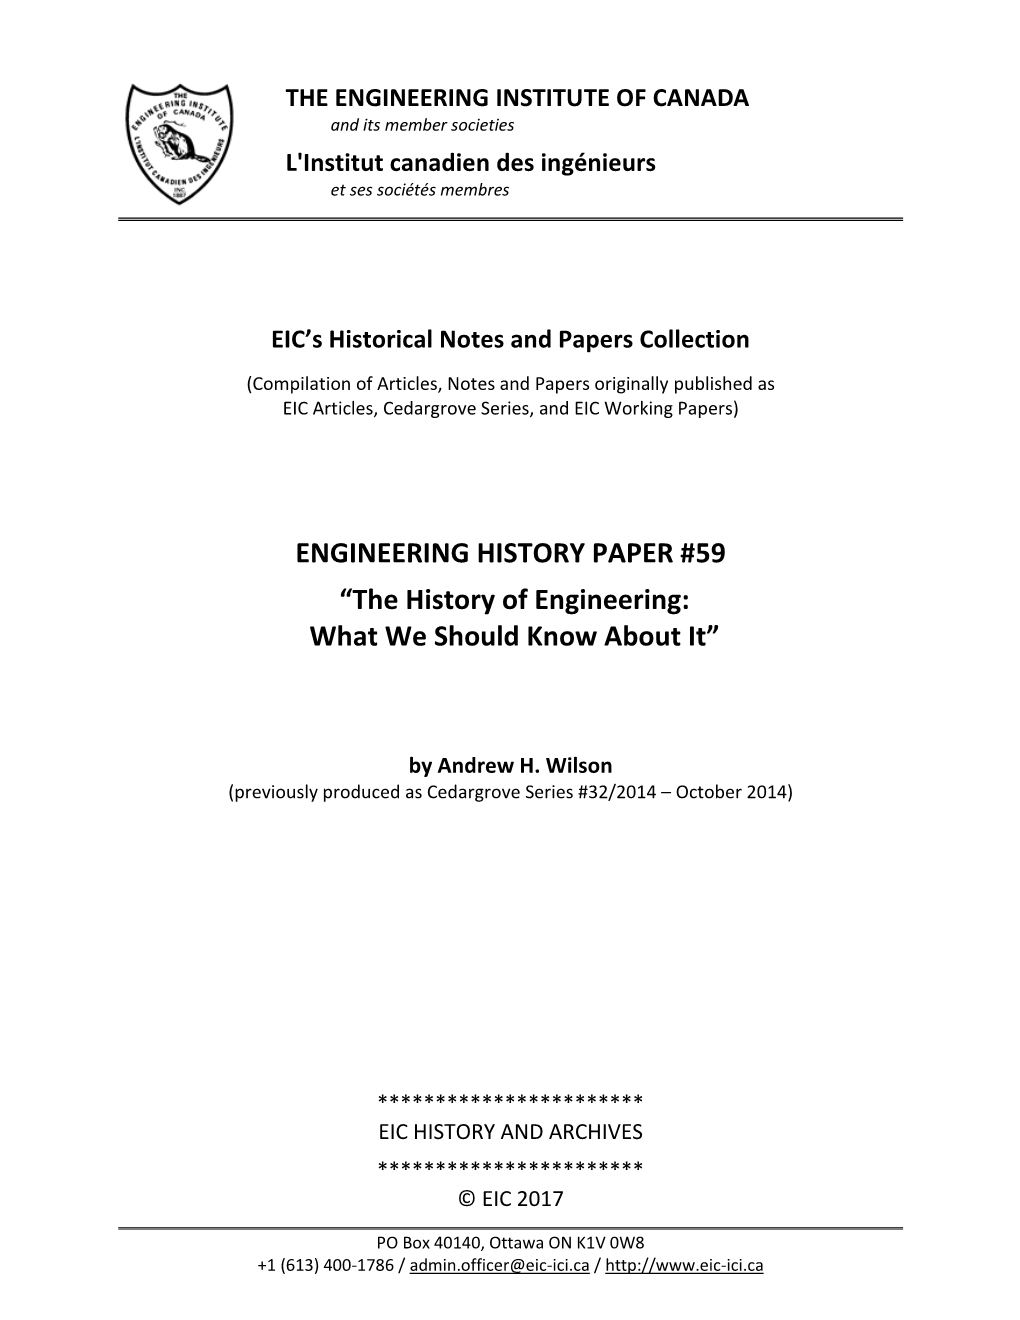 ENGINEERING HISTORY PAPER #59 “The History of Engineering: What We Should Know About It”